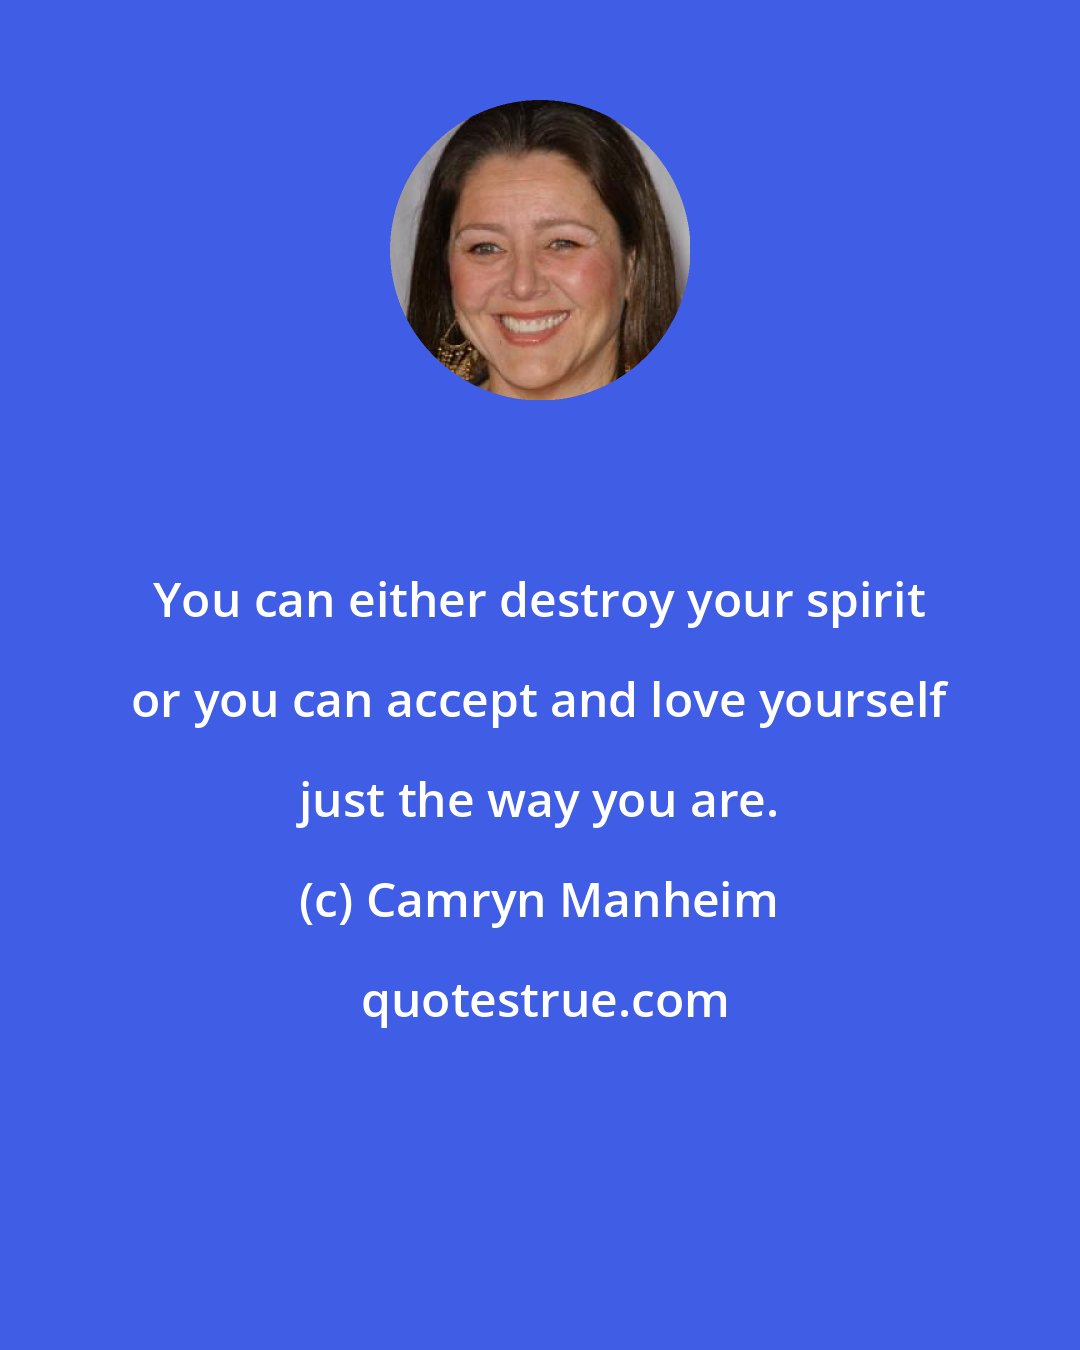 Camryn Manheim: You can either destroy your spirit or you can accept and love yourself just the way you are.